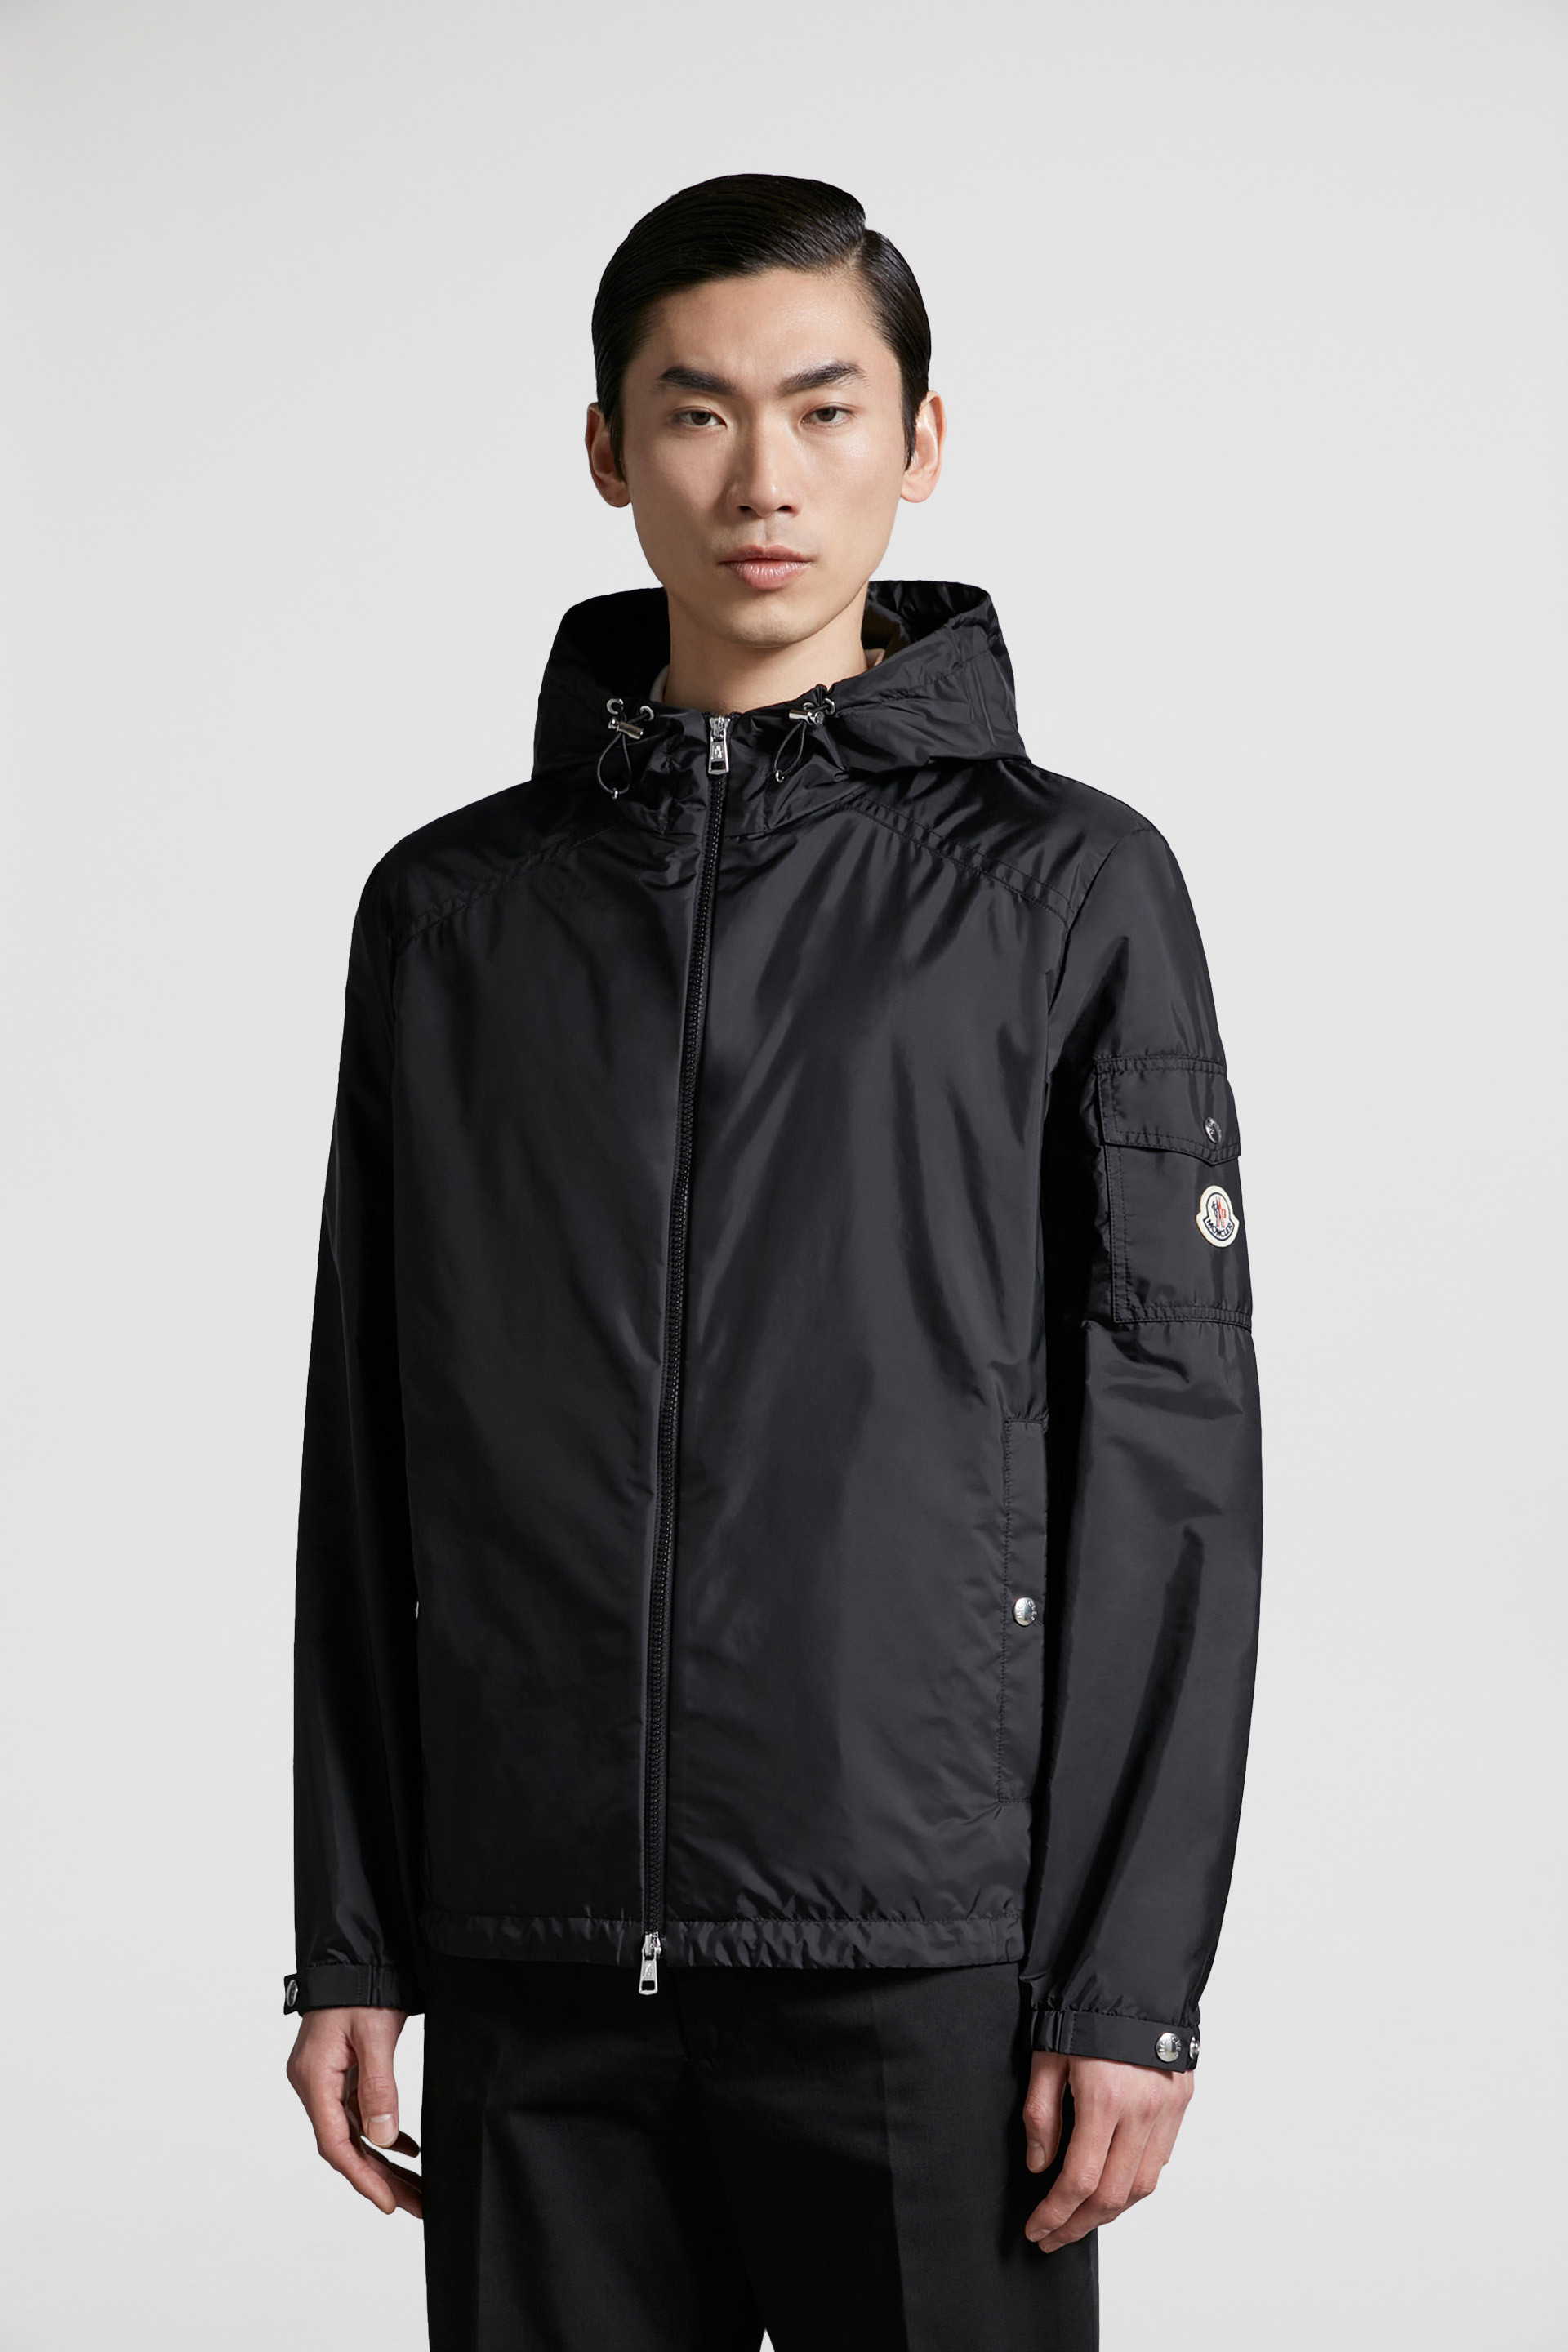 Moncler Greece Online Shop — Down coats, vests, and clothing